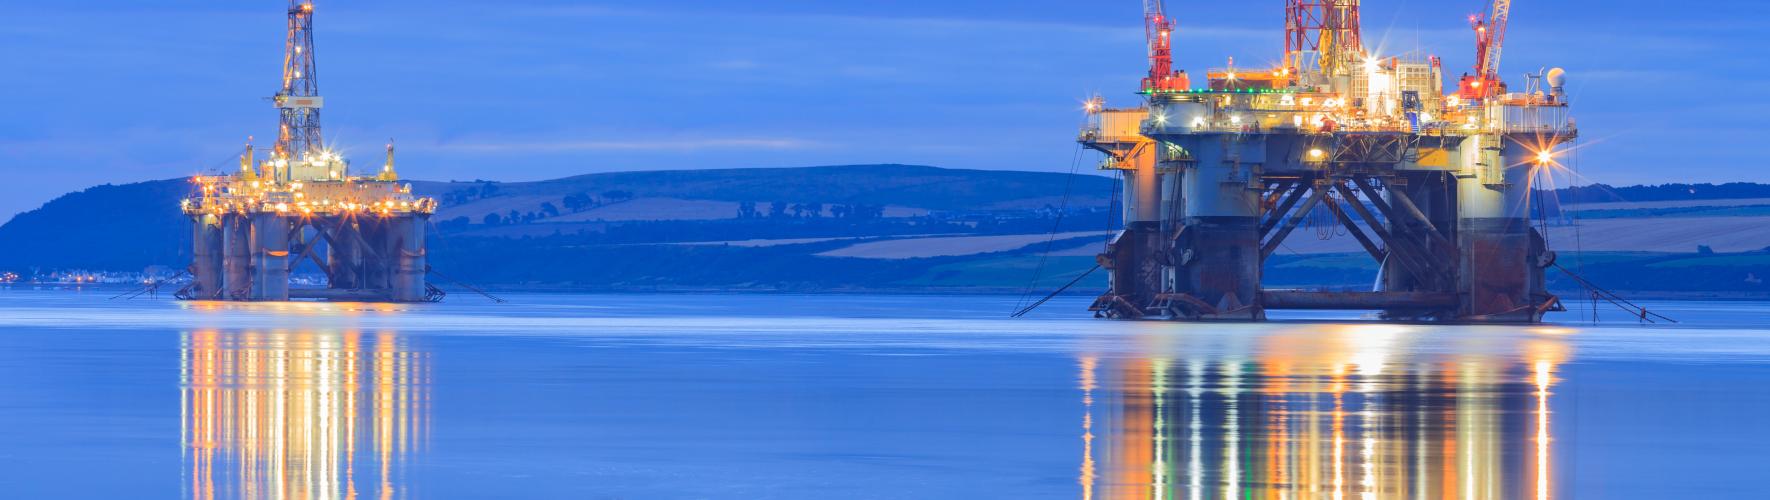 Serving the North Sea Oil and Gas Industry